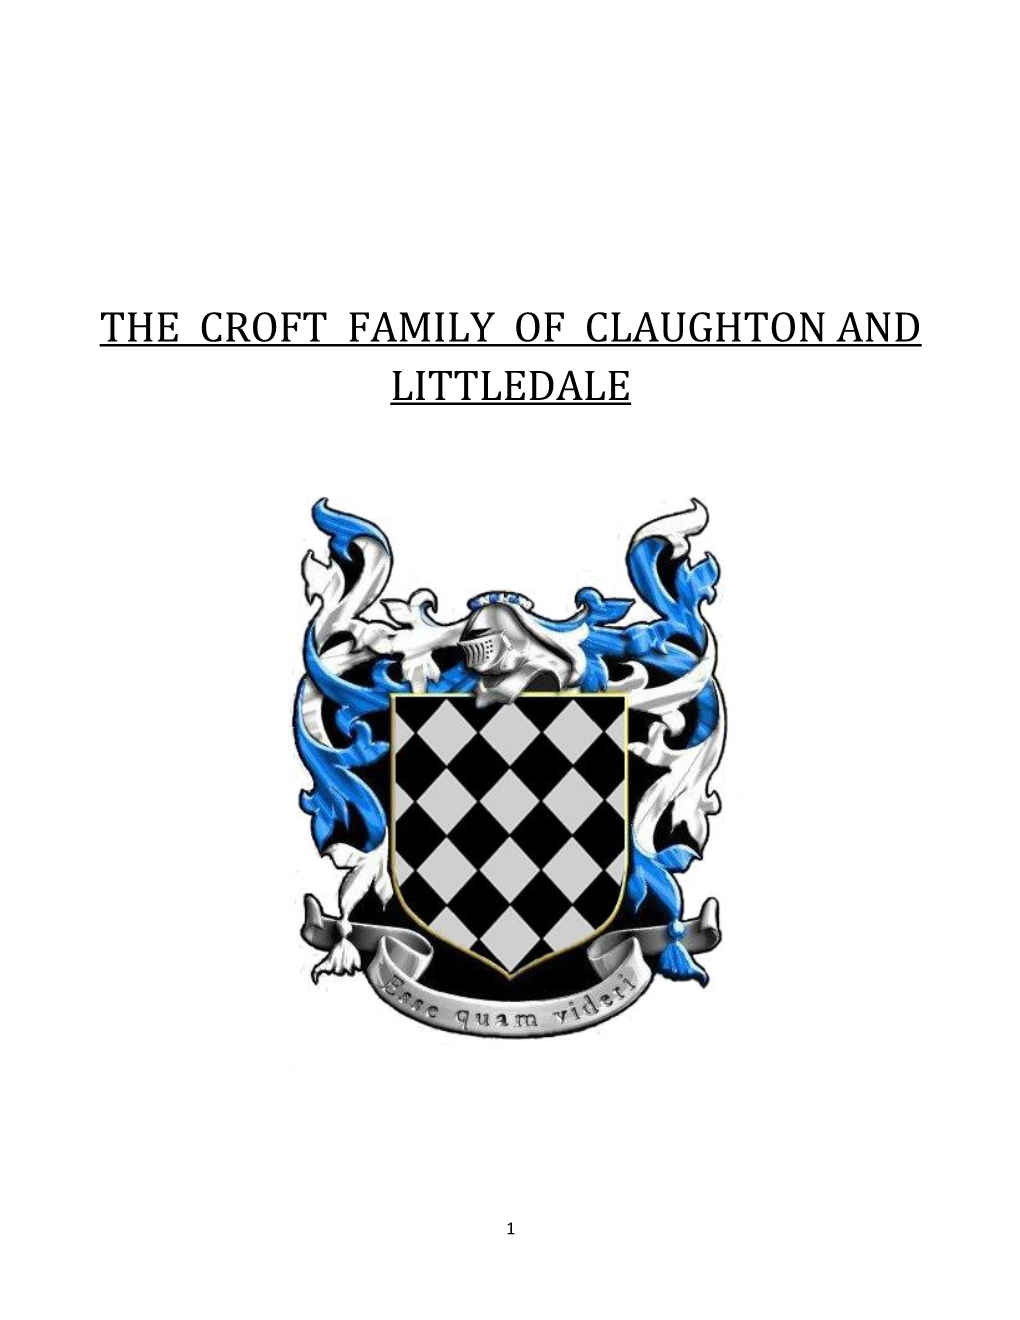 The Croft Family of Claughton and Littledale